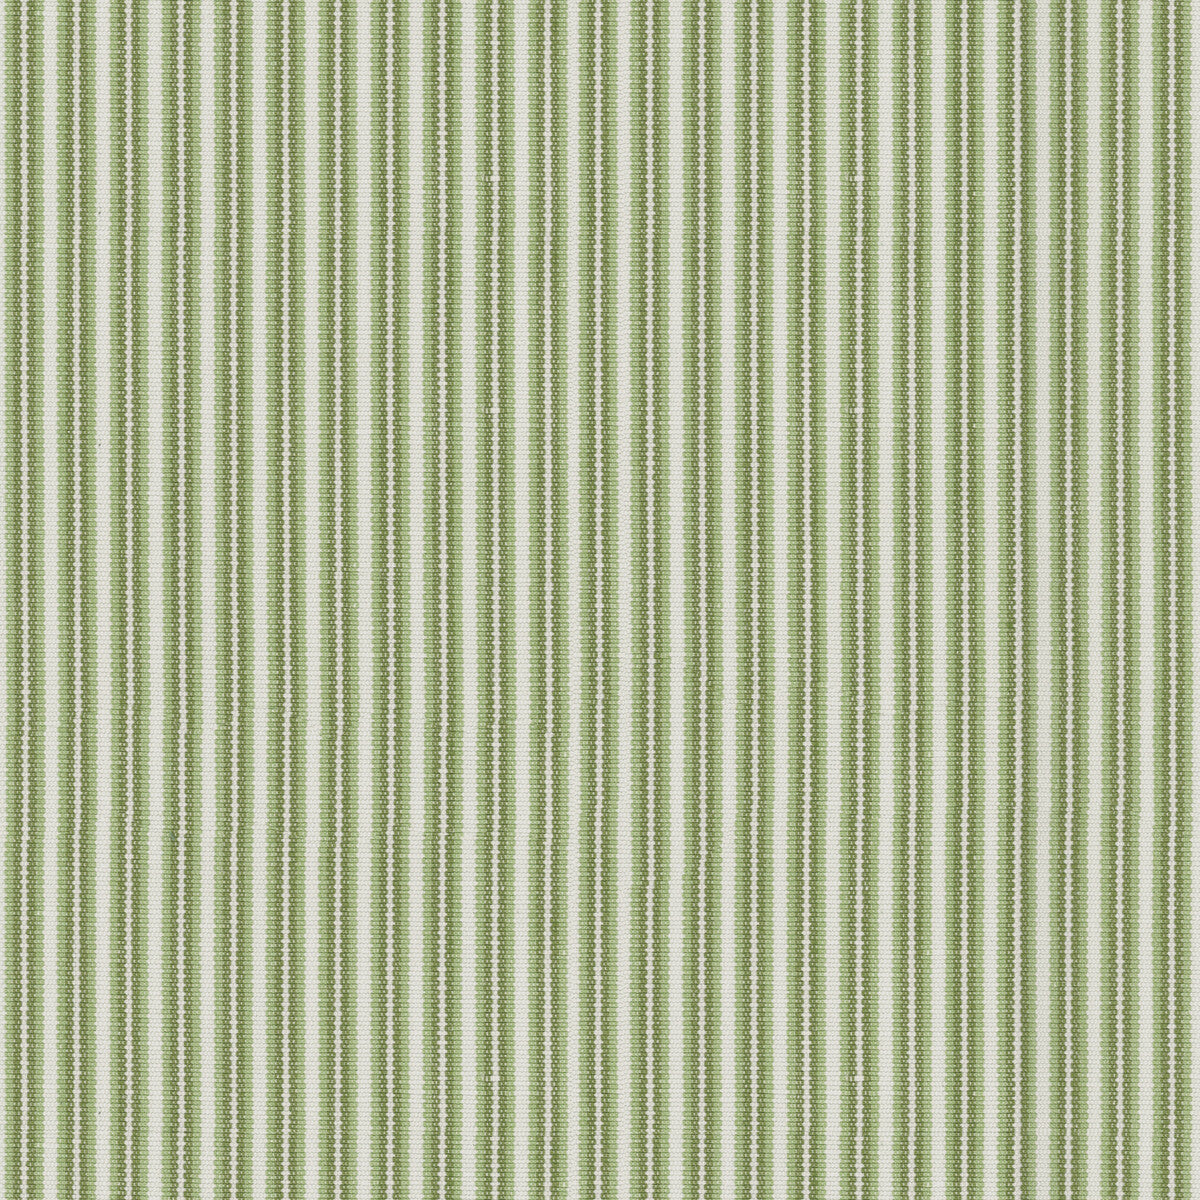 Chamas Stripe fabric in leaf color - pattern 8017103.3.0 - by Brunschwig &amp; Fils in the Durance collection